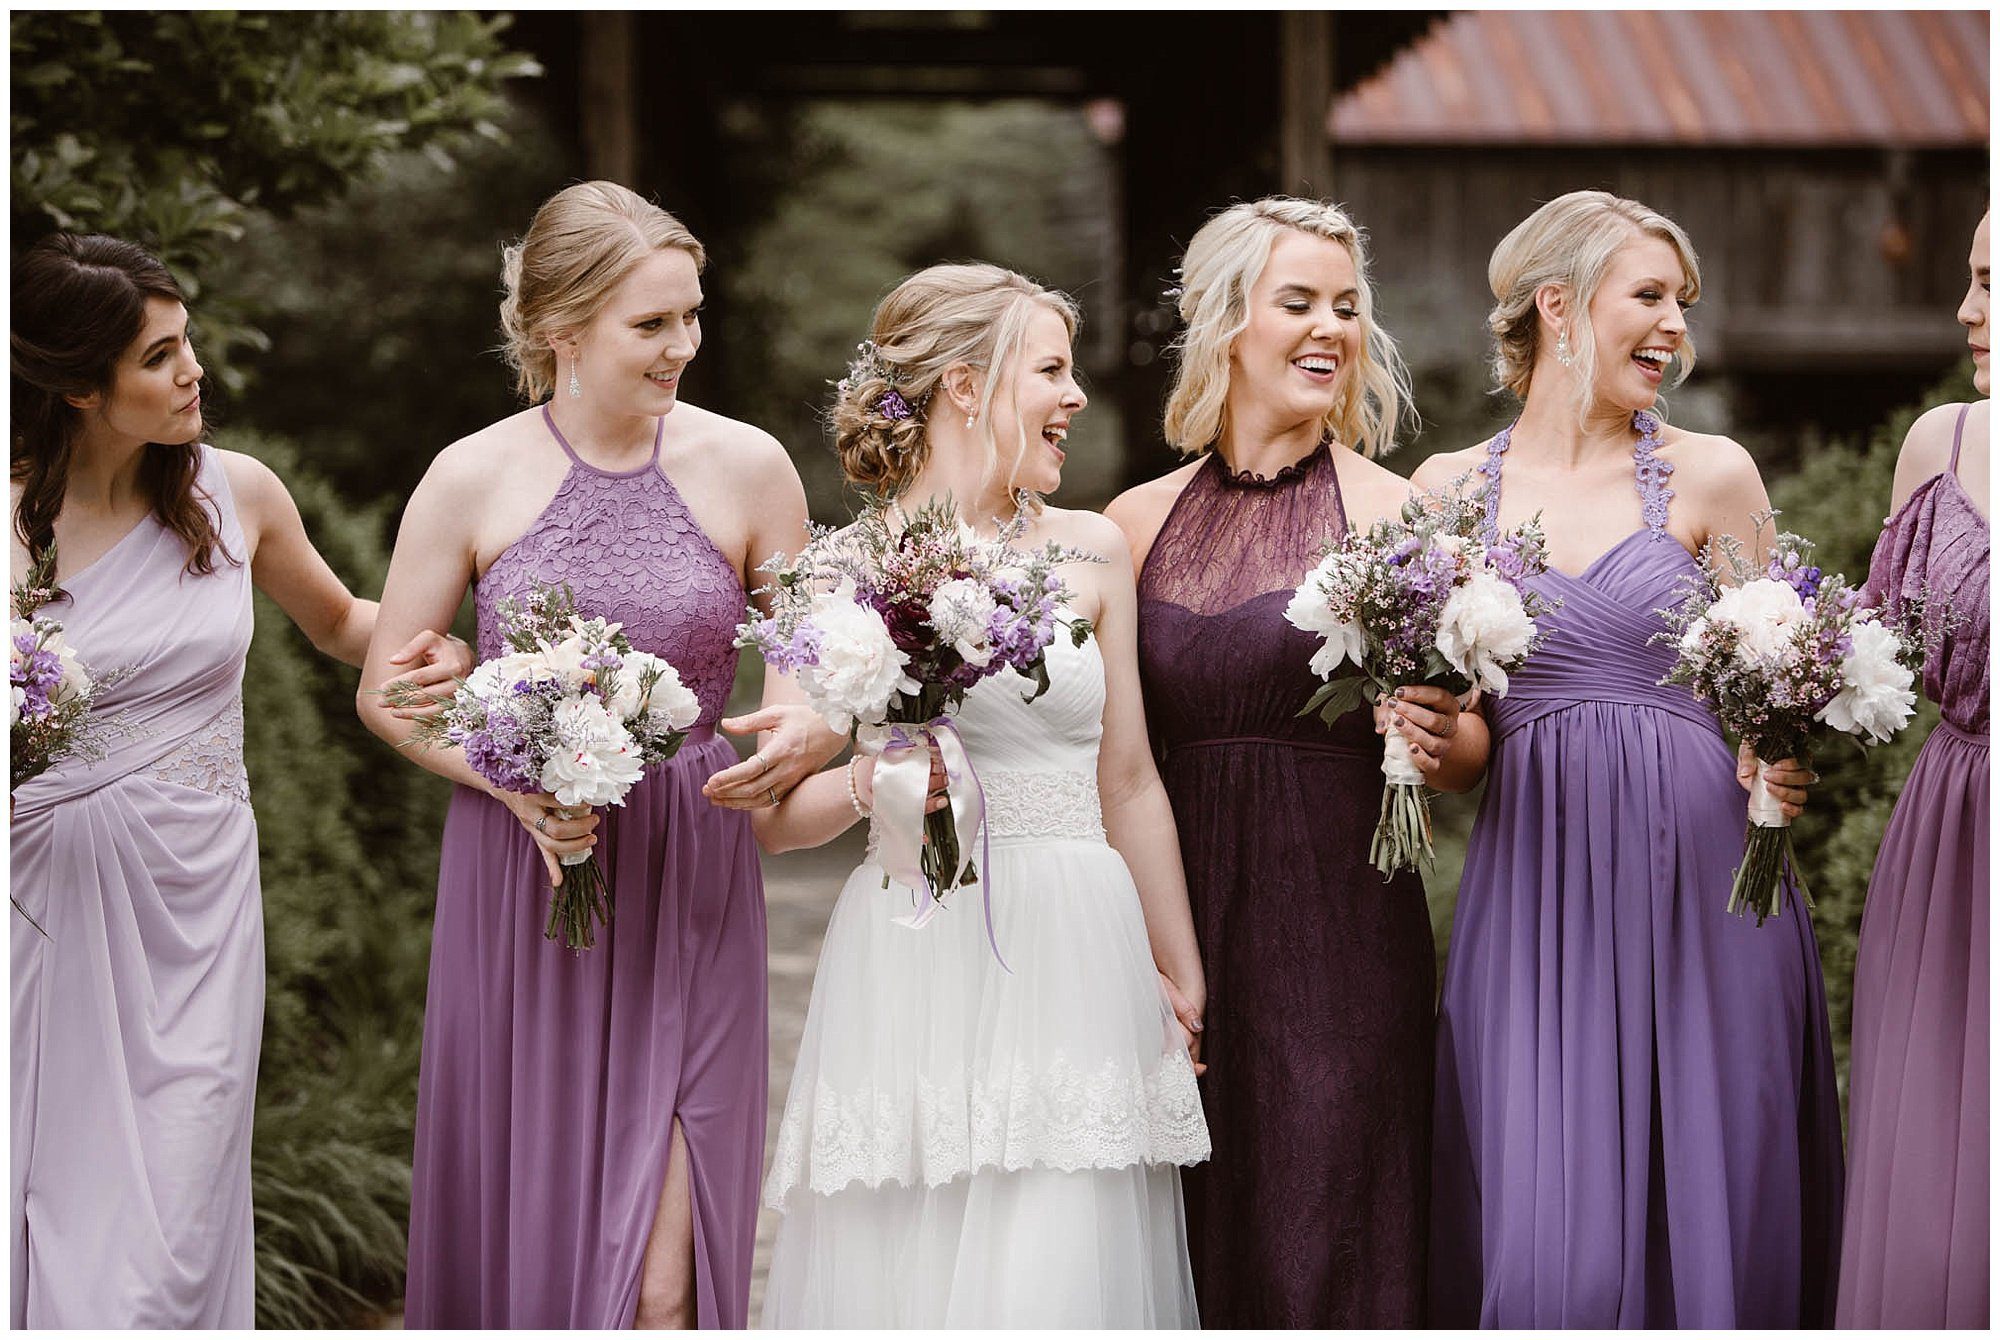 Bride and bridesmaids at rustic mountain wedding in Tennessee